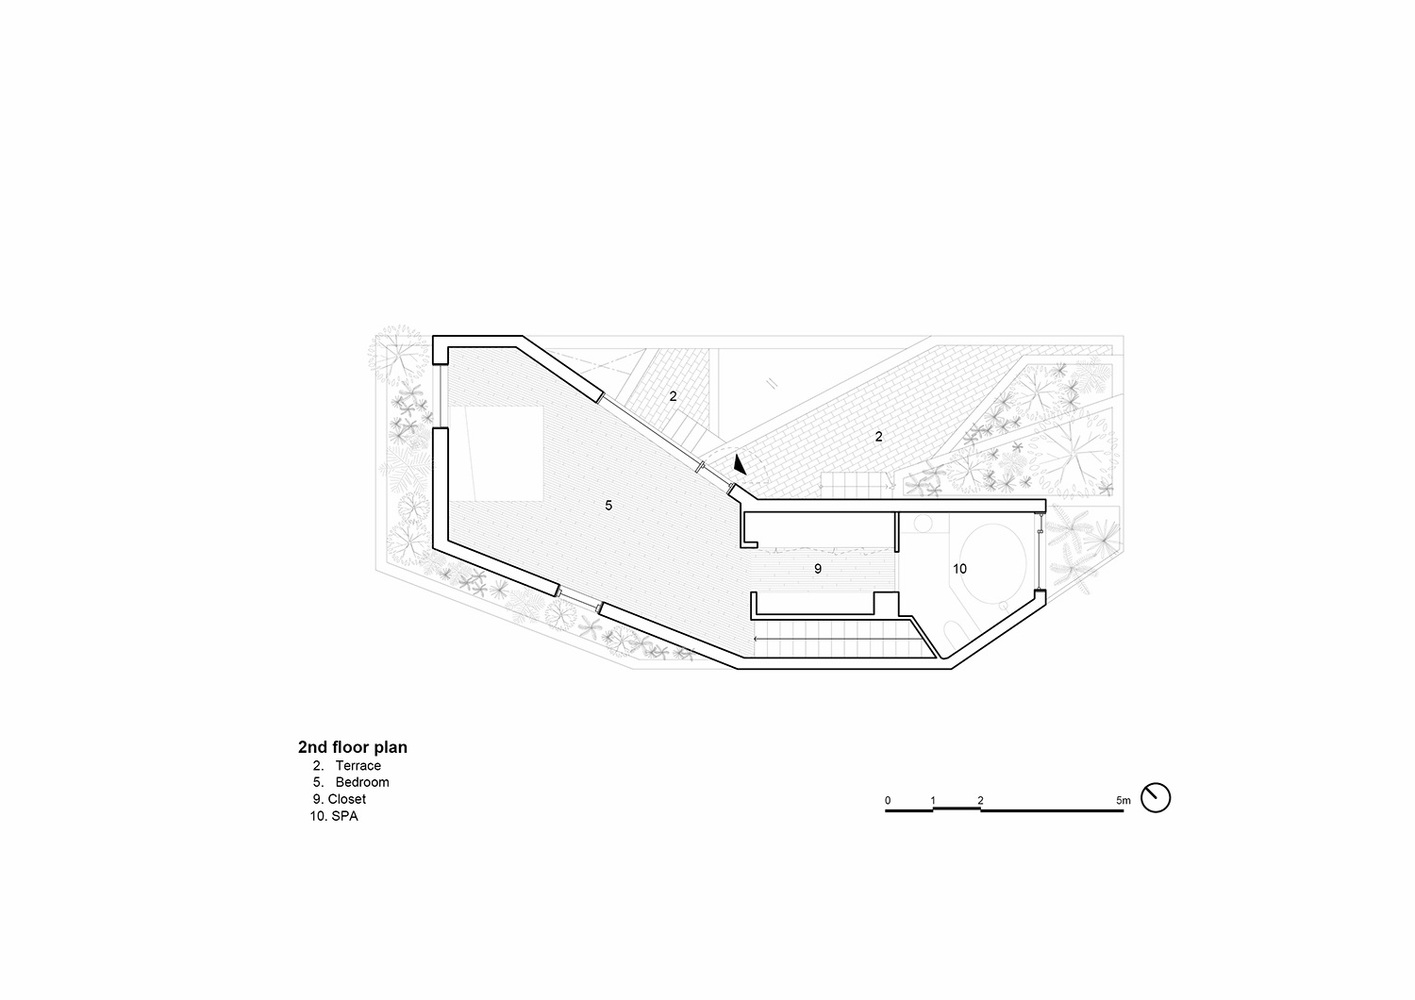 HH_DRAWING_3_2nd_floor_plan